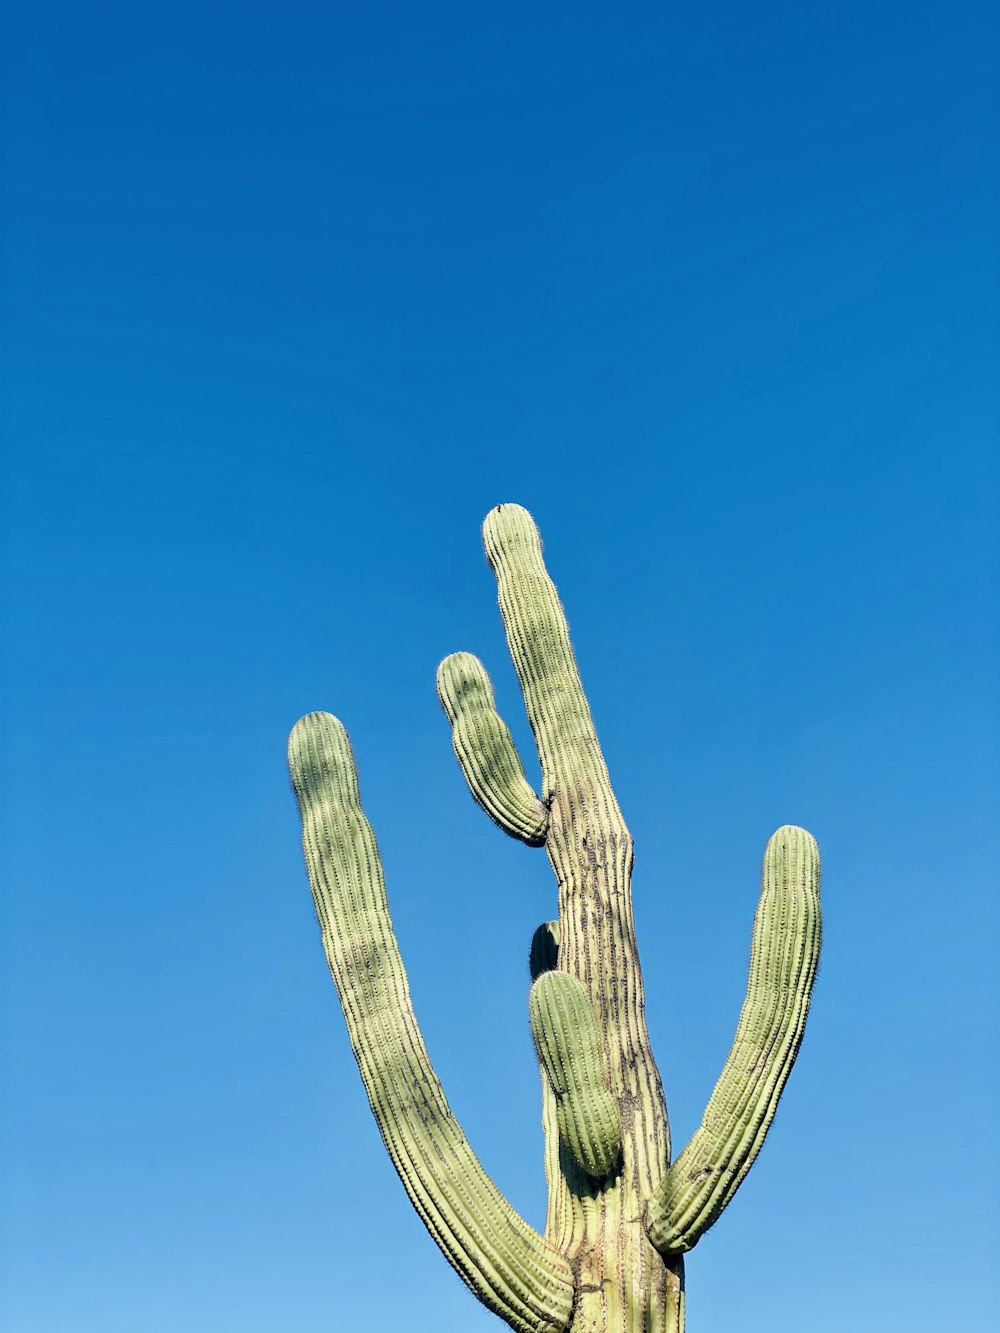 a large cactus in front of a blue sky